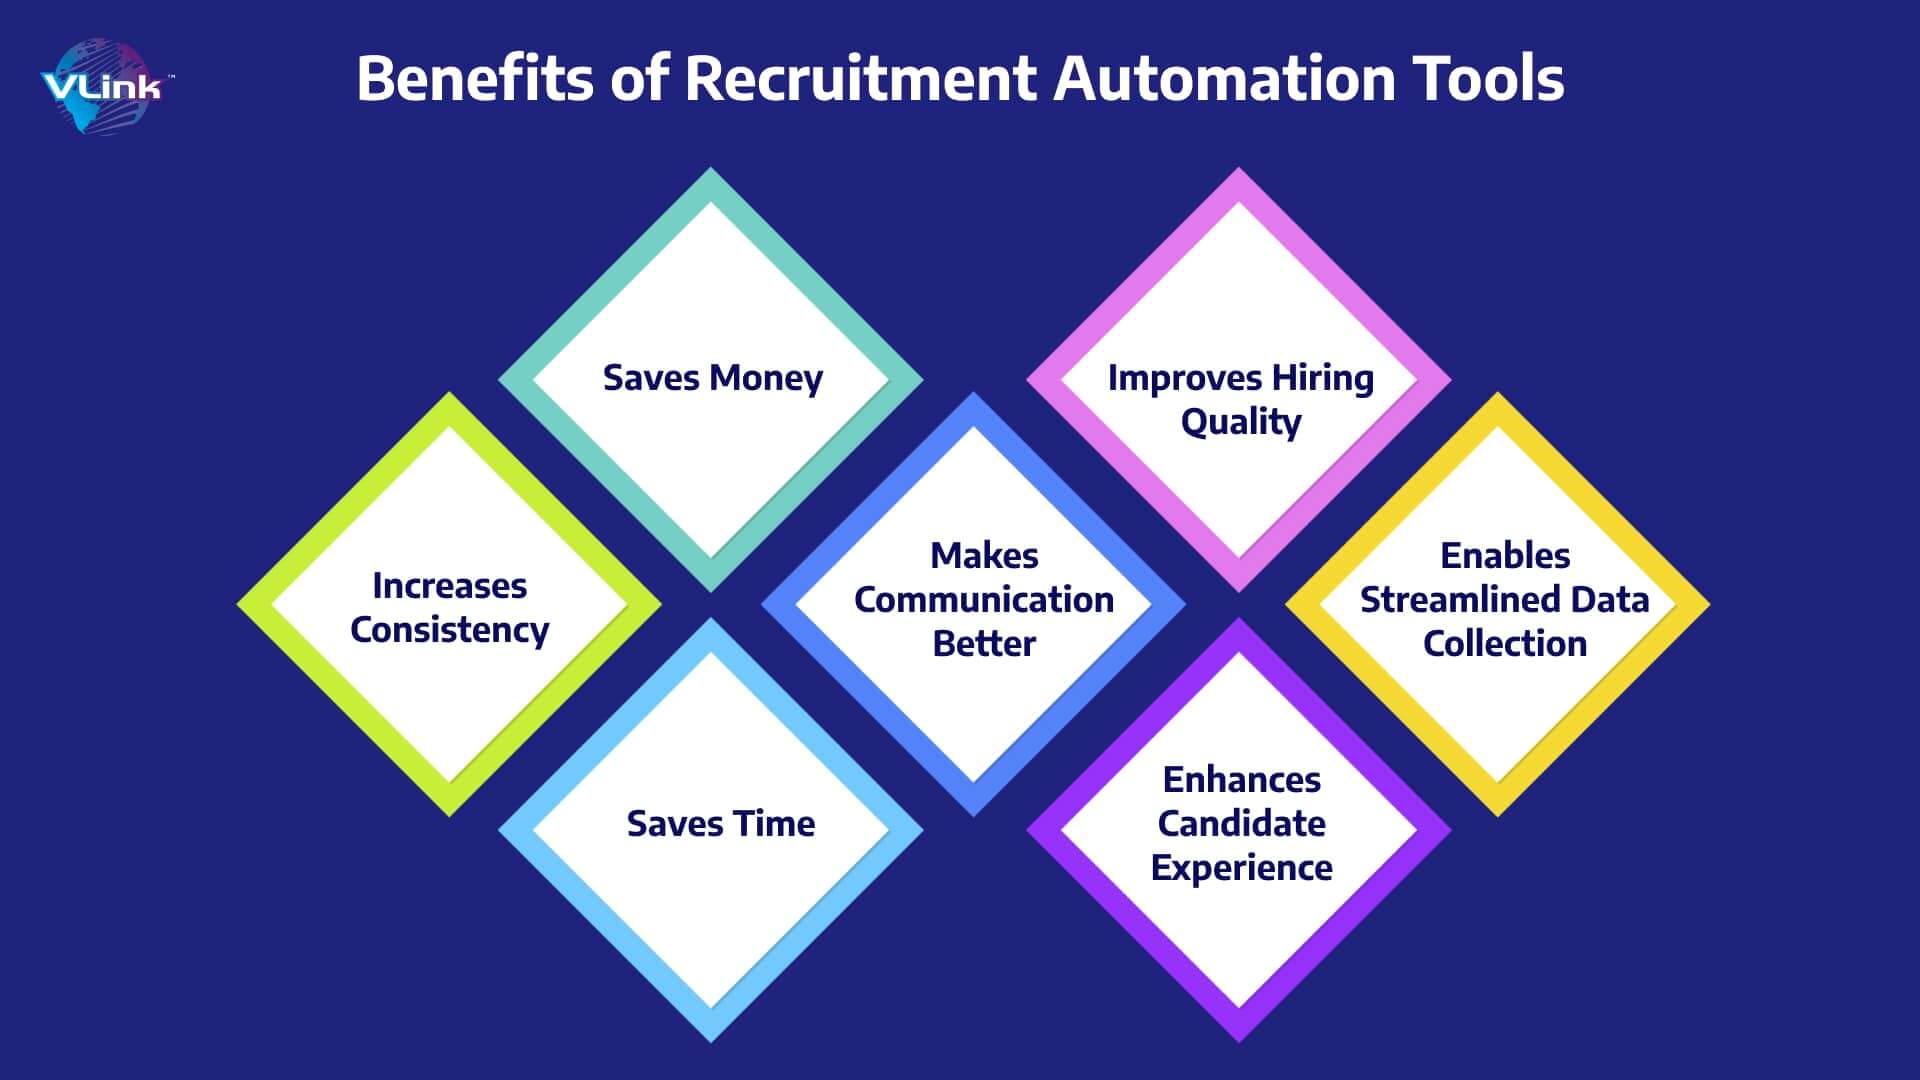 Benefits of Recruitment Automation Tools